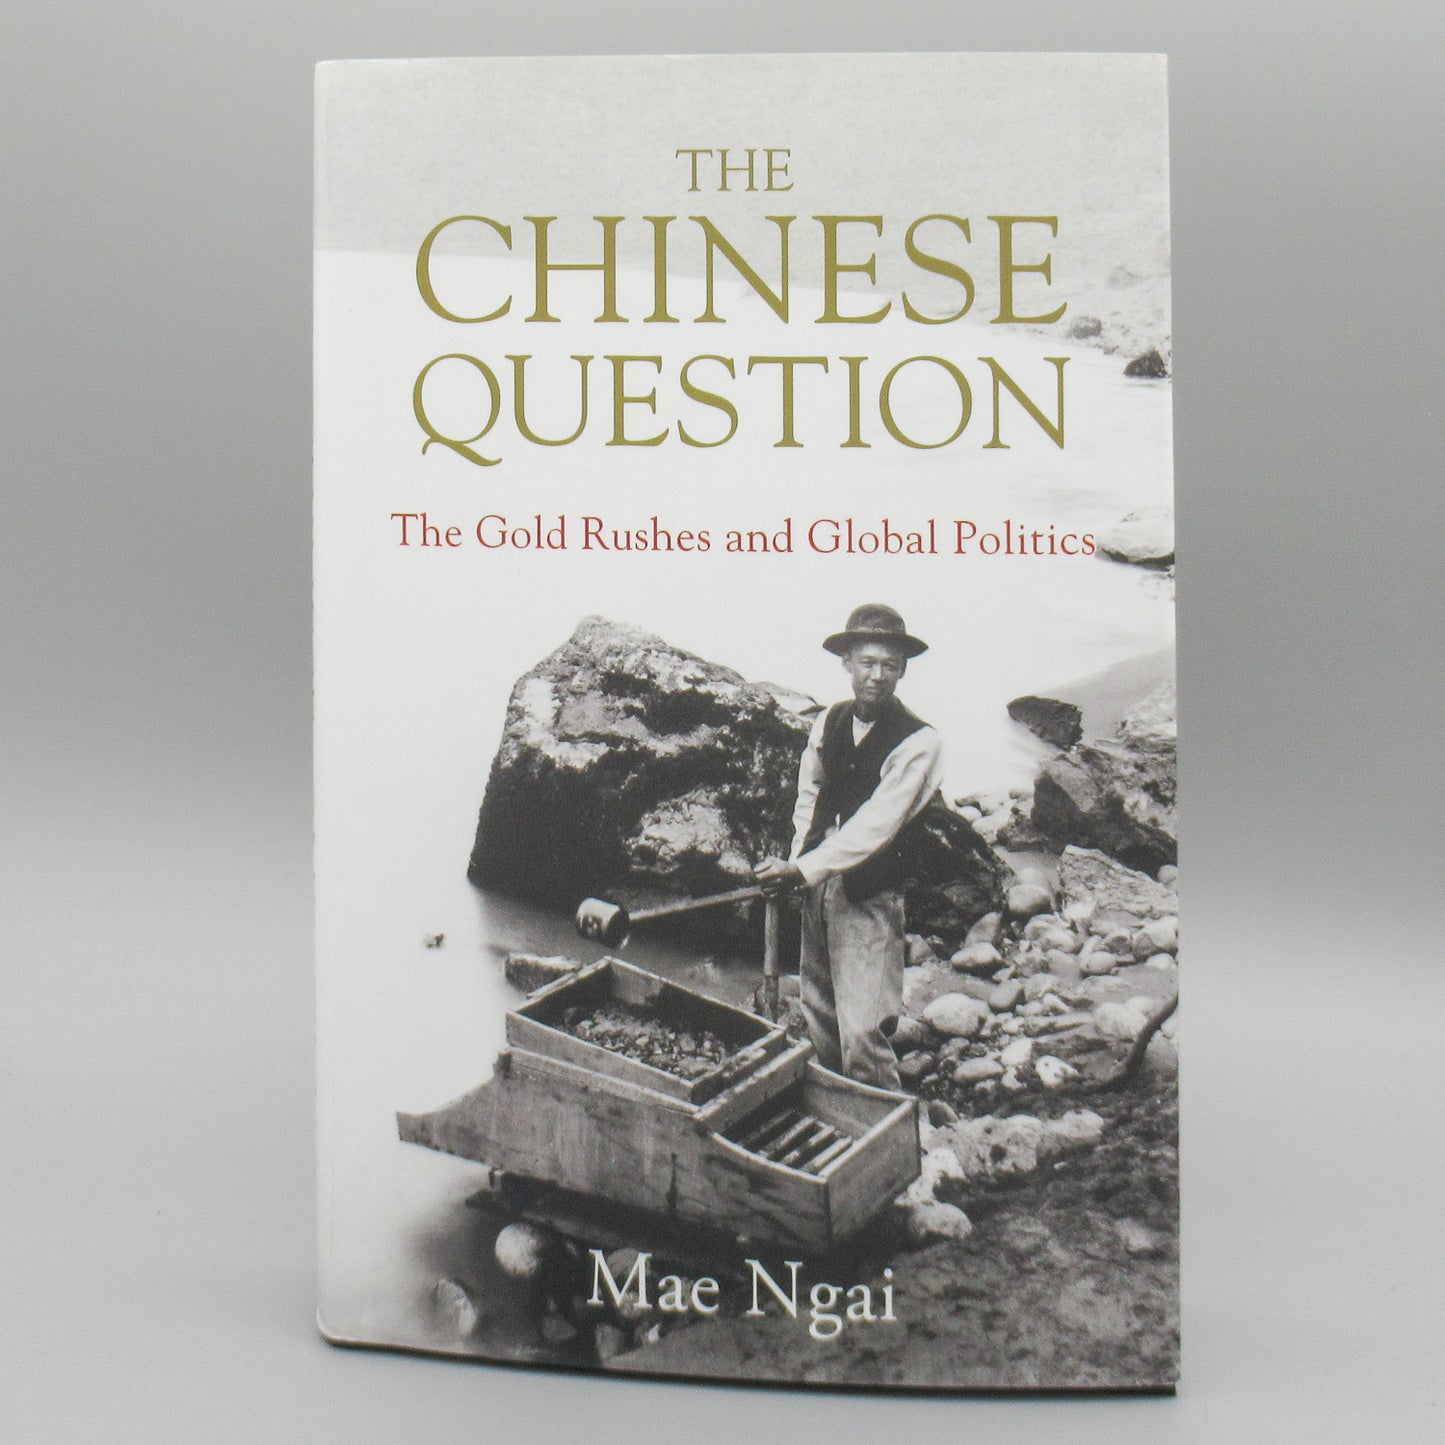 The Chinese Question: The Gold Rushes and Global Politics ***